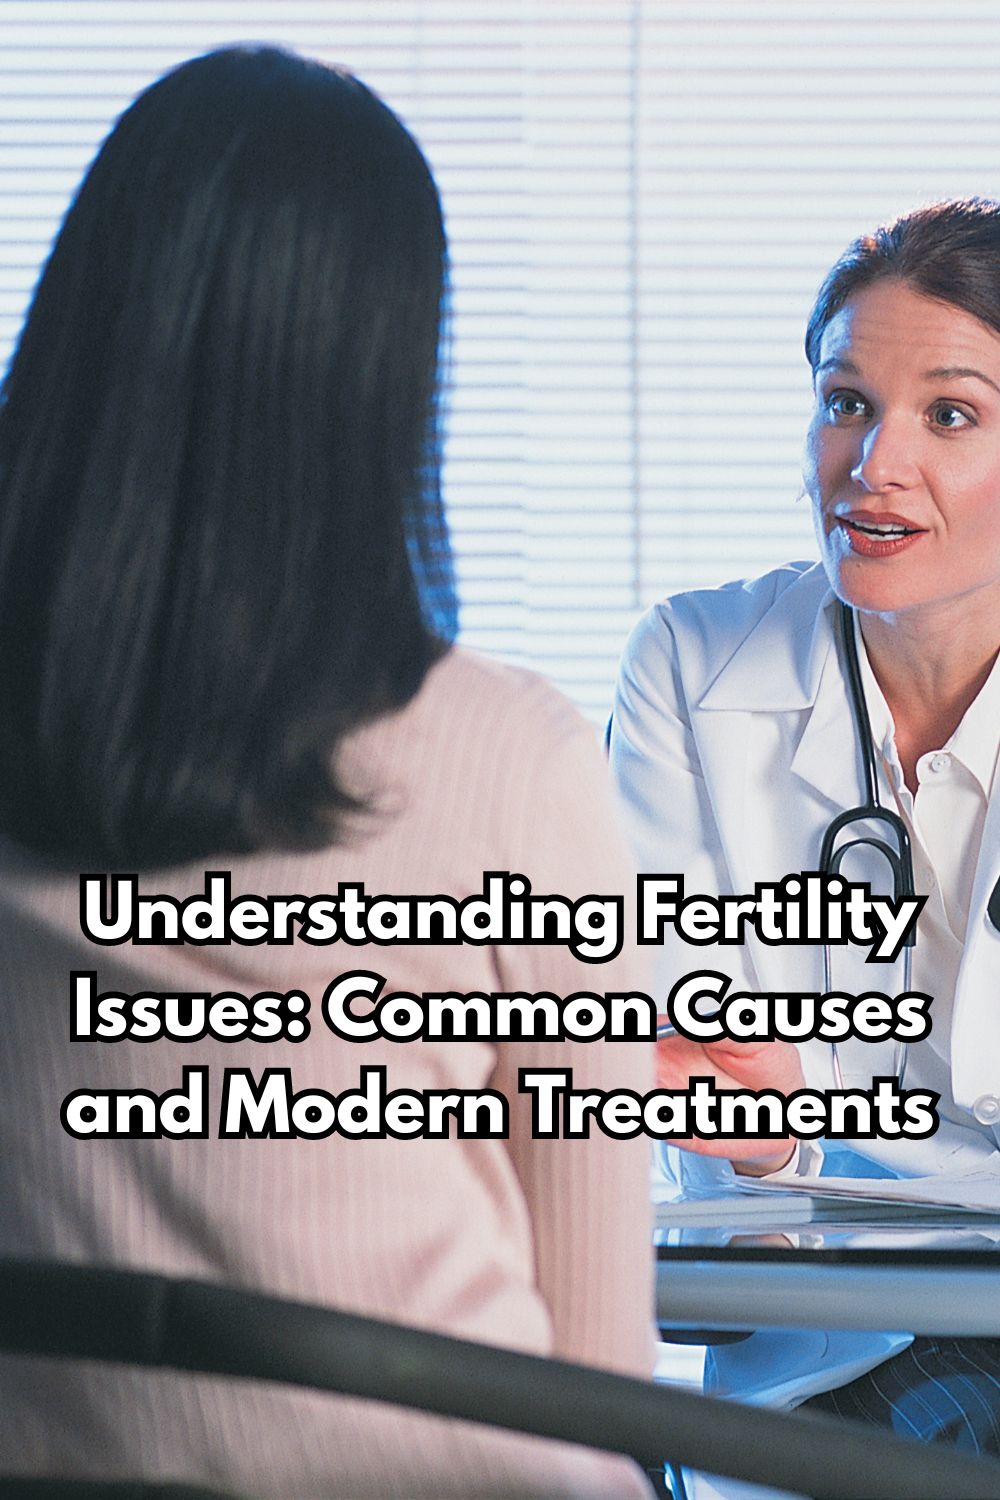 Understanding Fertility Issues: Common Causes and Modern Treatments